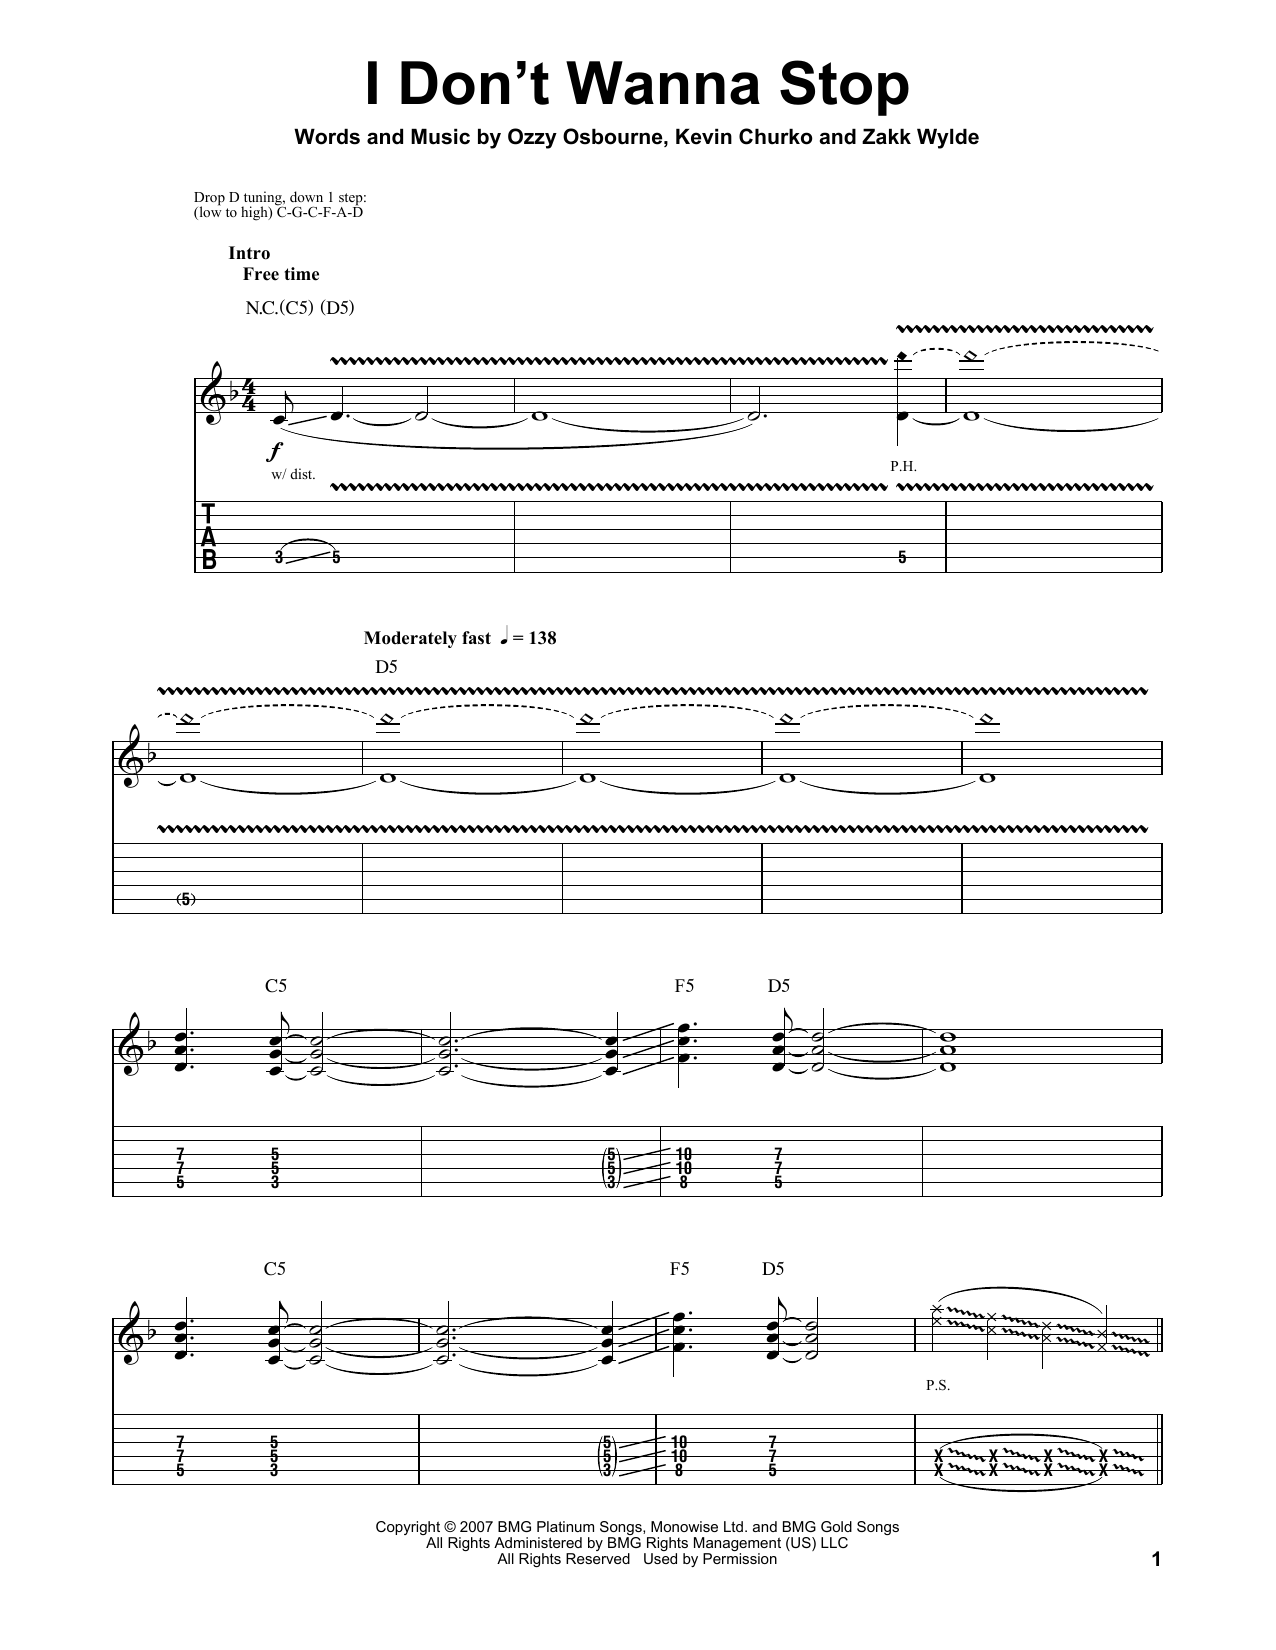 Download Ozzy Osbourne I Don't Wanna Stop Sheet Music